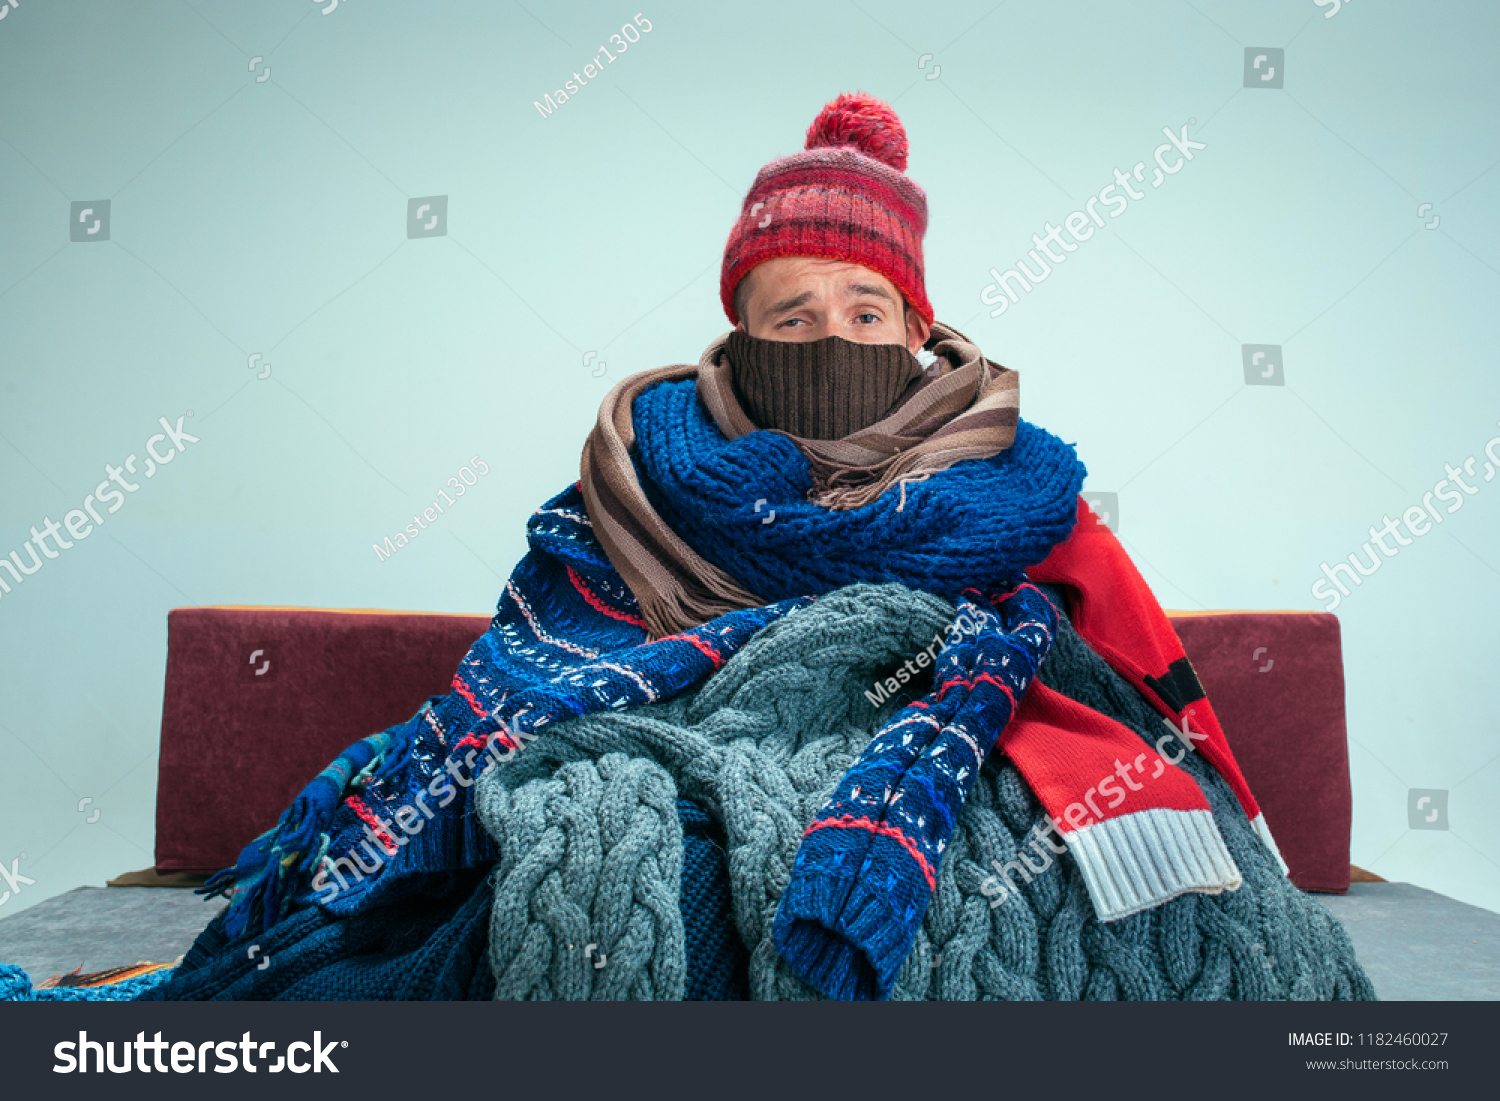 Bearded sick man with flue sitting on sofa at home or studio covered with knitted warm clothes. Illness, influenza, pain concept. Relaxation at Home. Healthcare Concepts. #1182460027